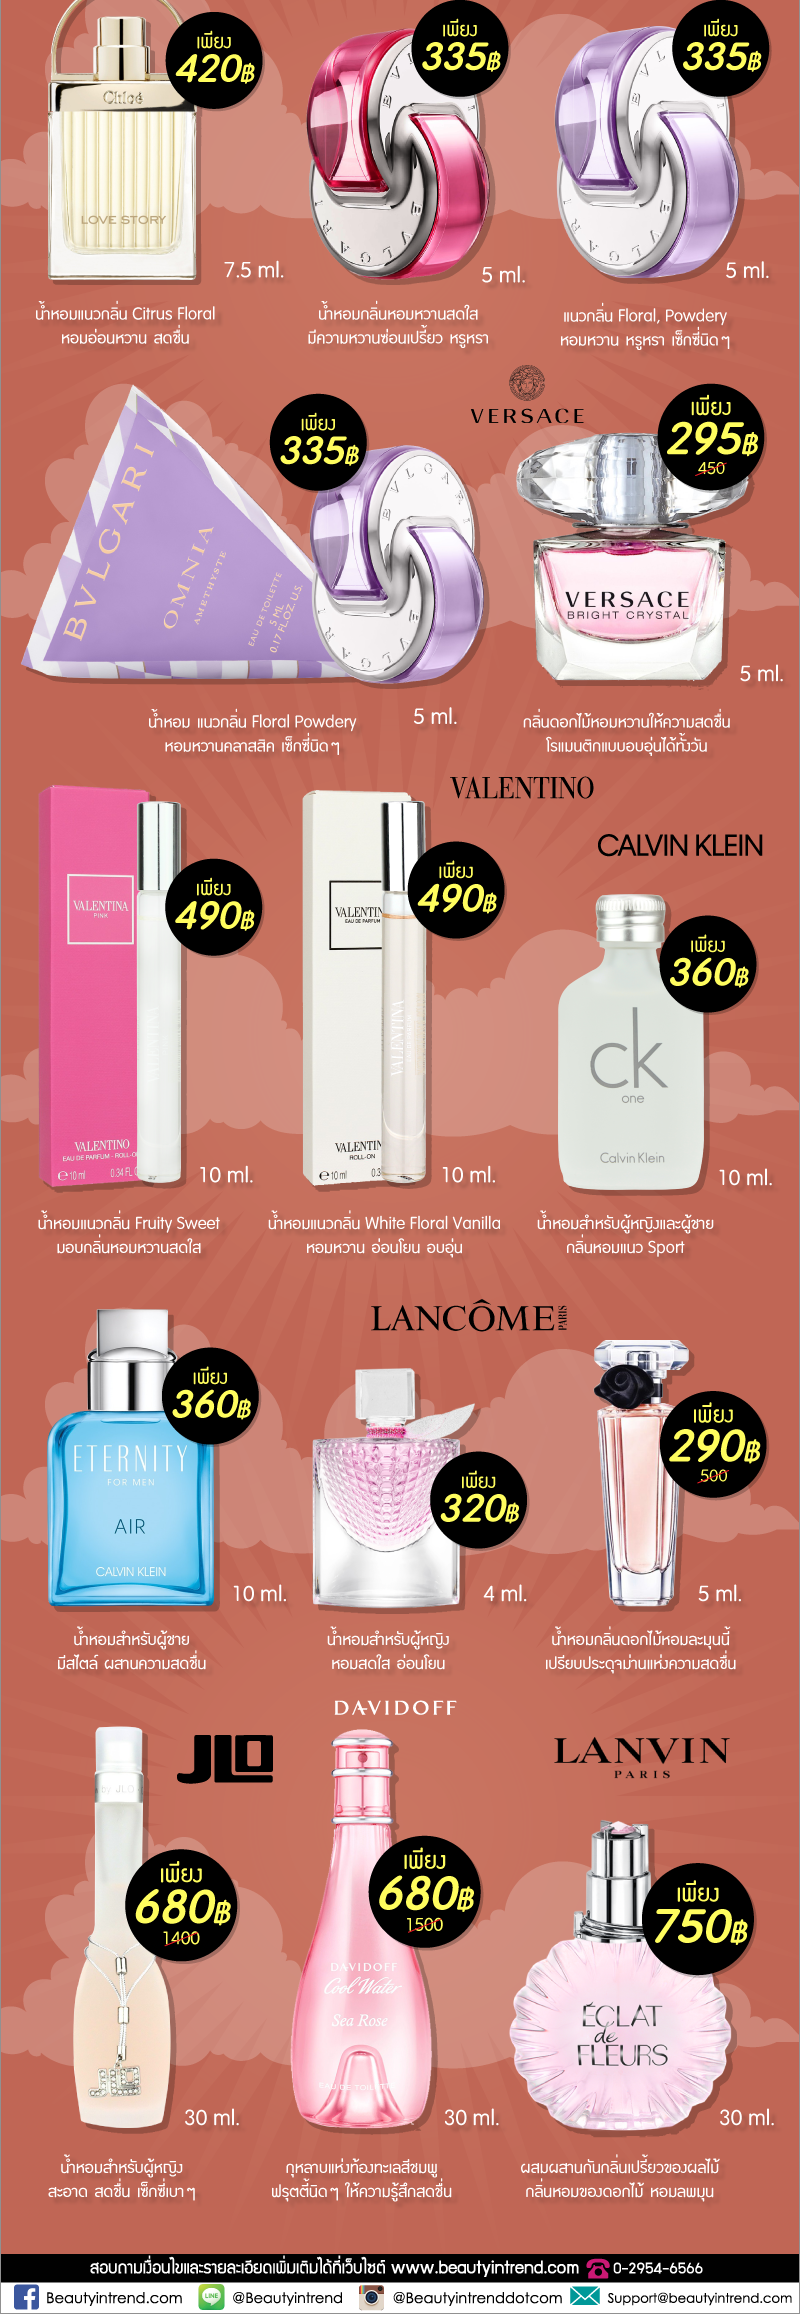 Travel-Size-perfume-2.png